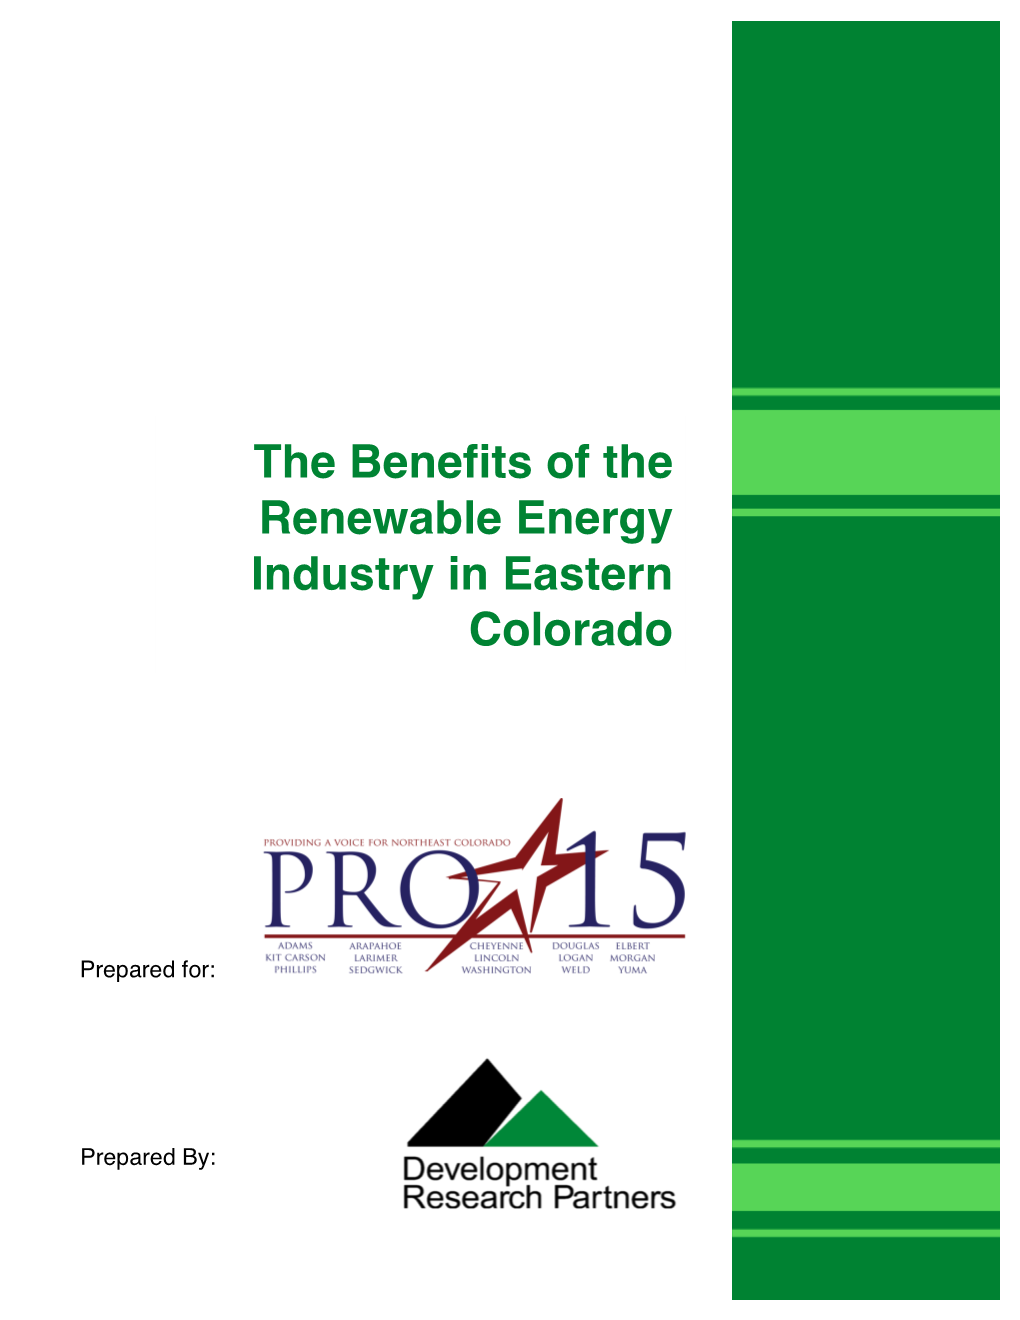 The Benefits of the Renewable Energy Industry in Eastern Colorado